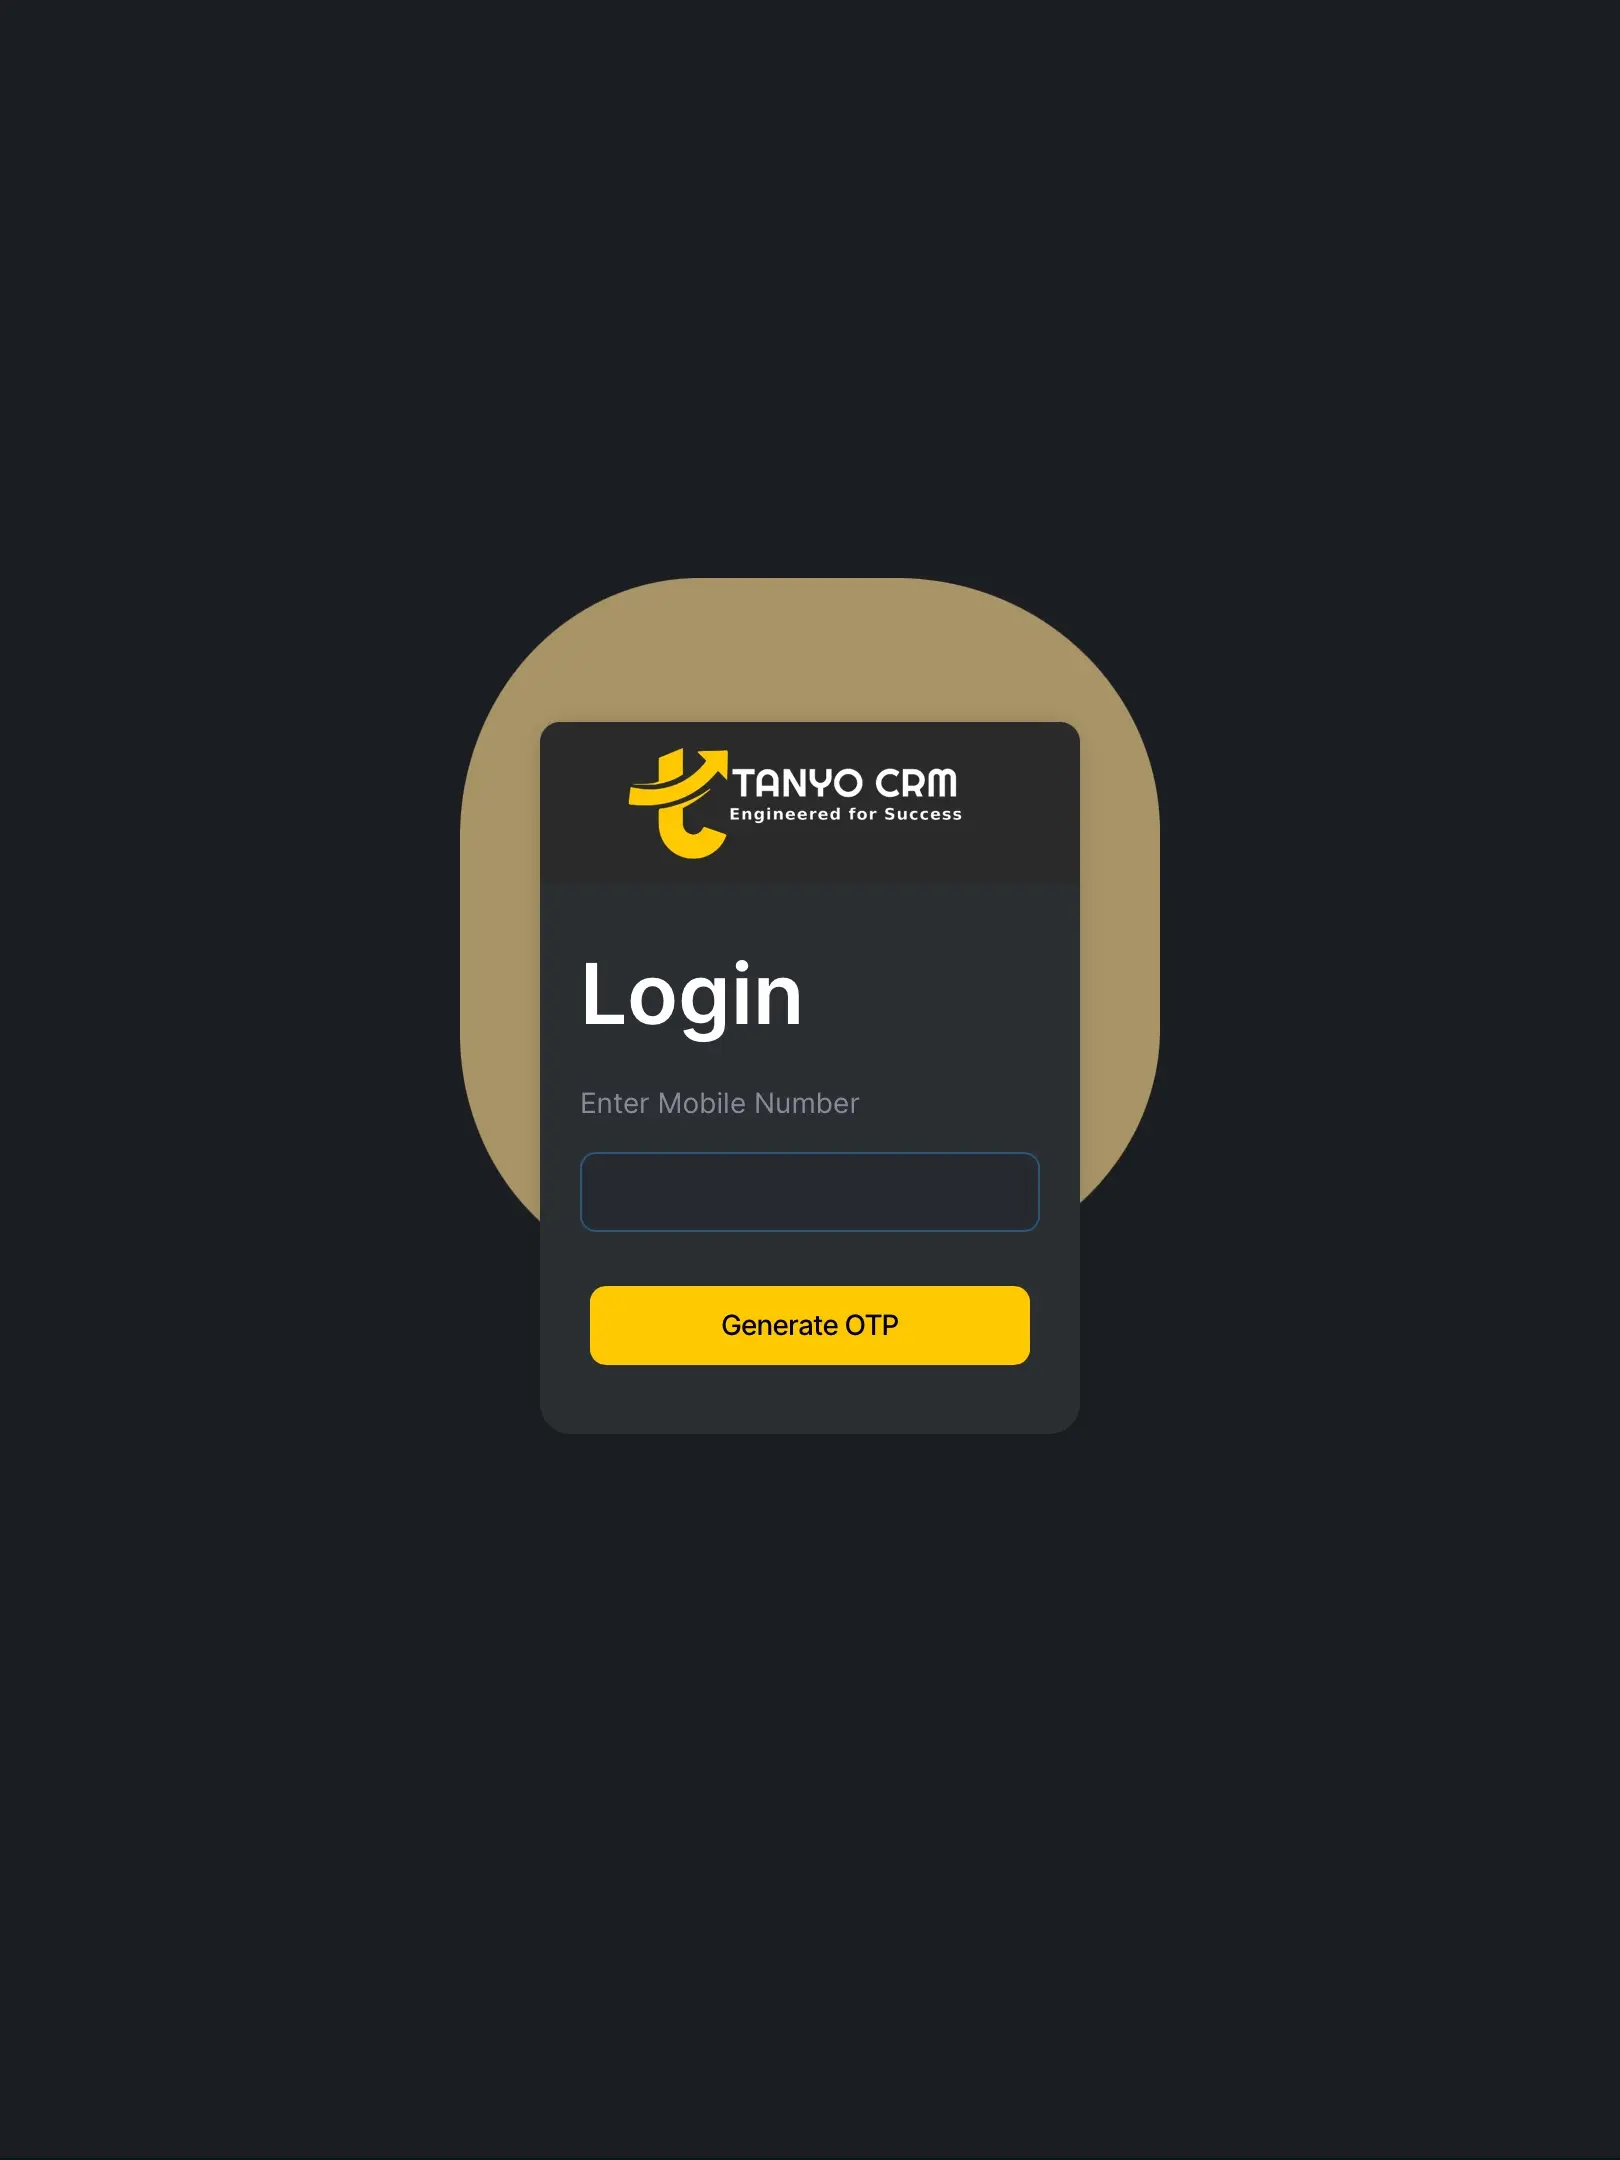 Tanyo CRM ipad login screen with a field to enter mobile number and a button to generate OTP.